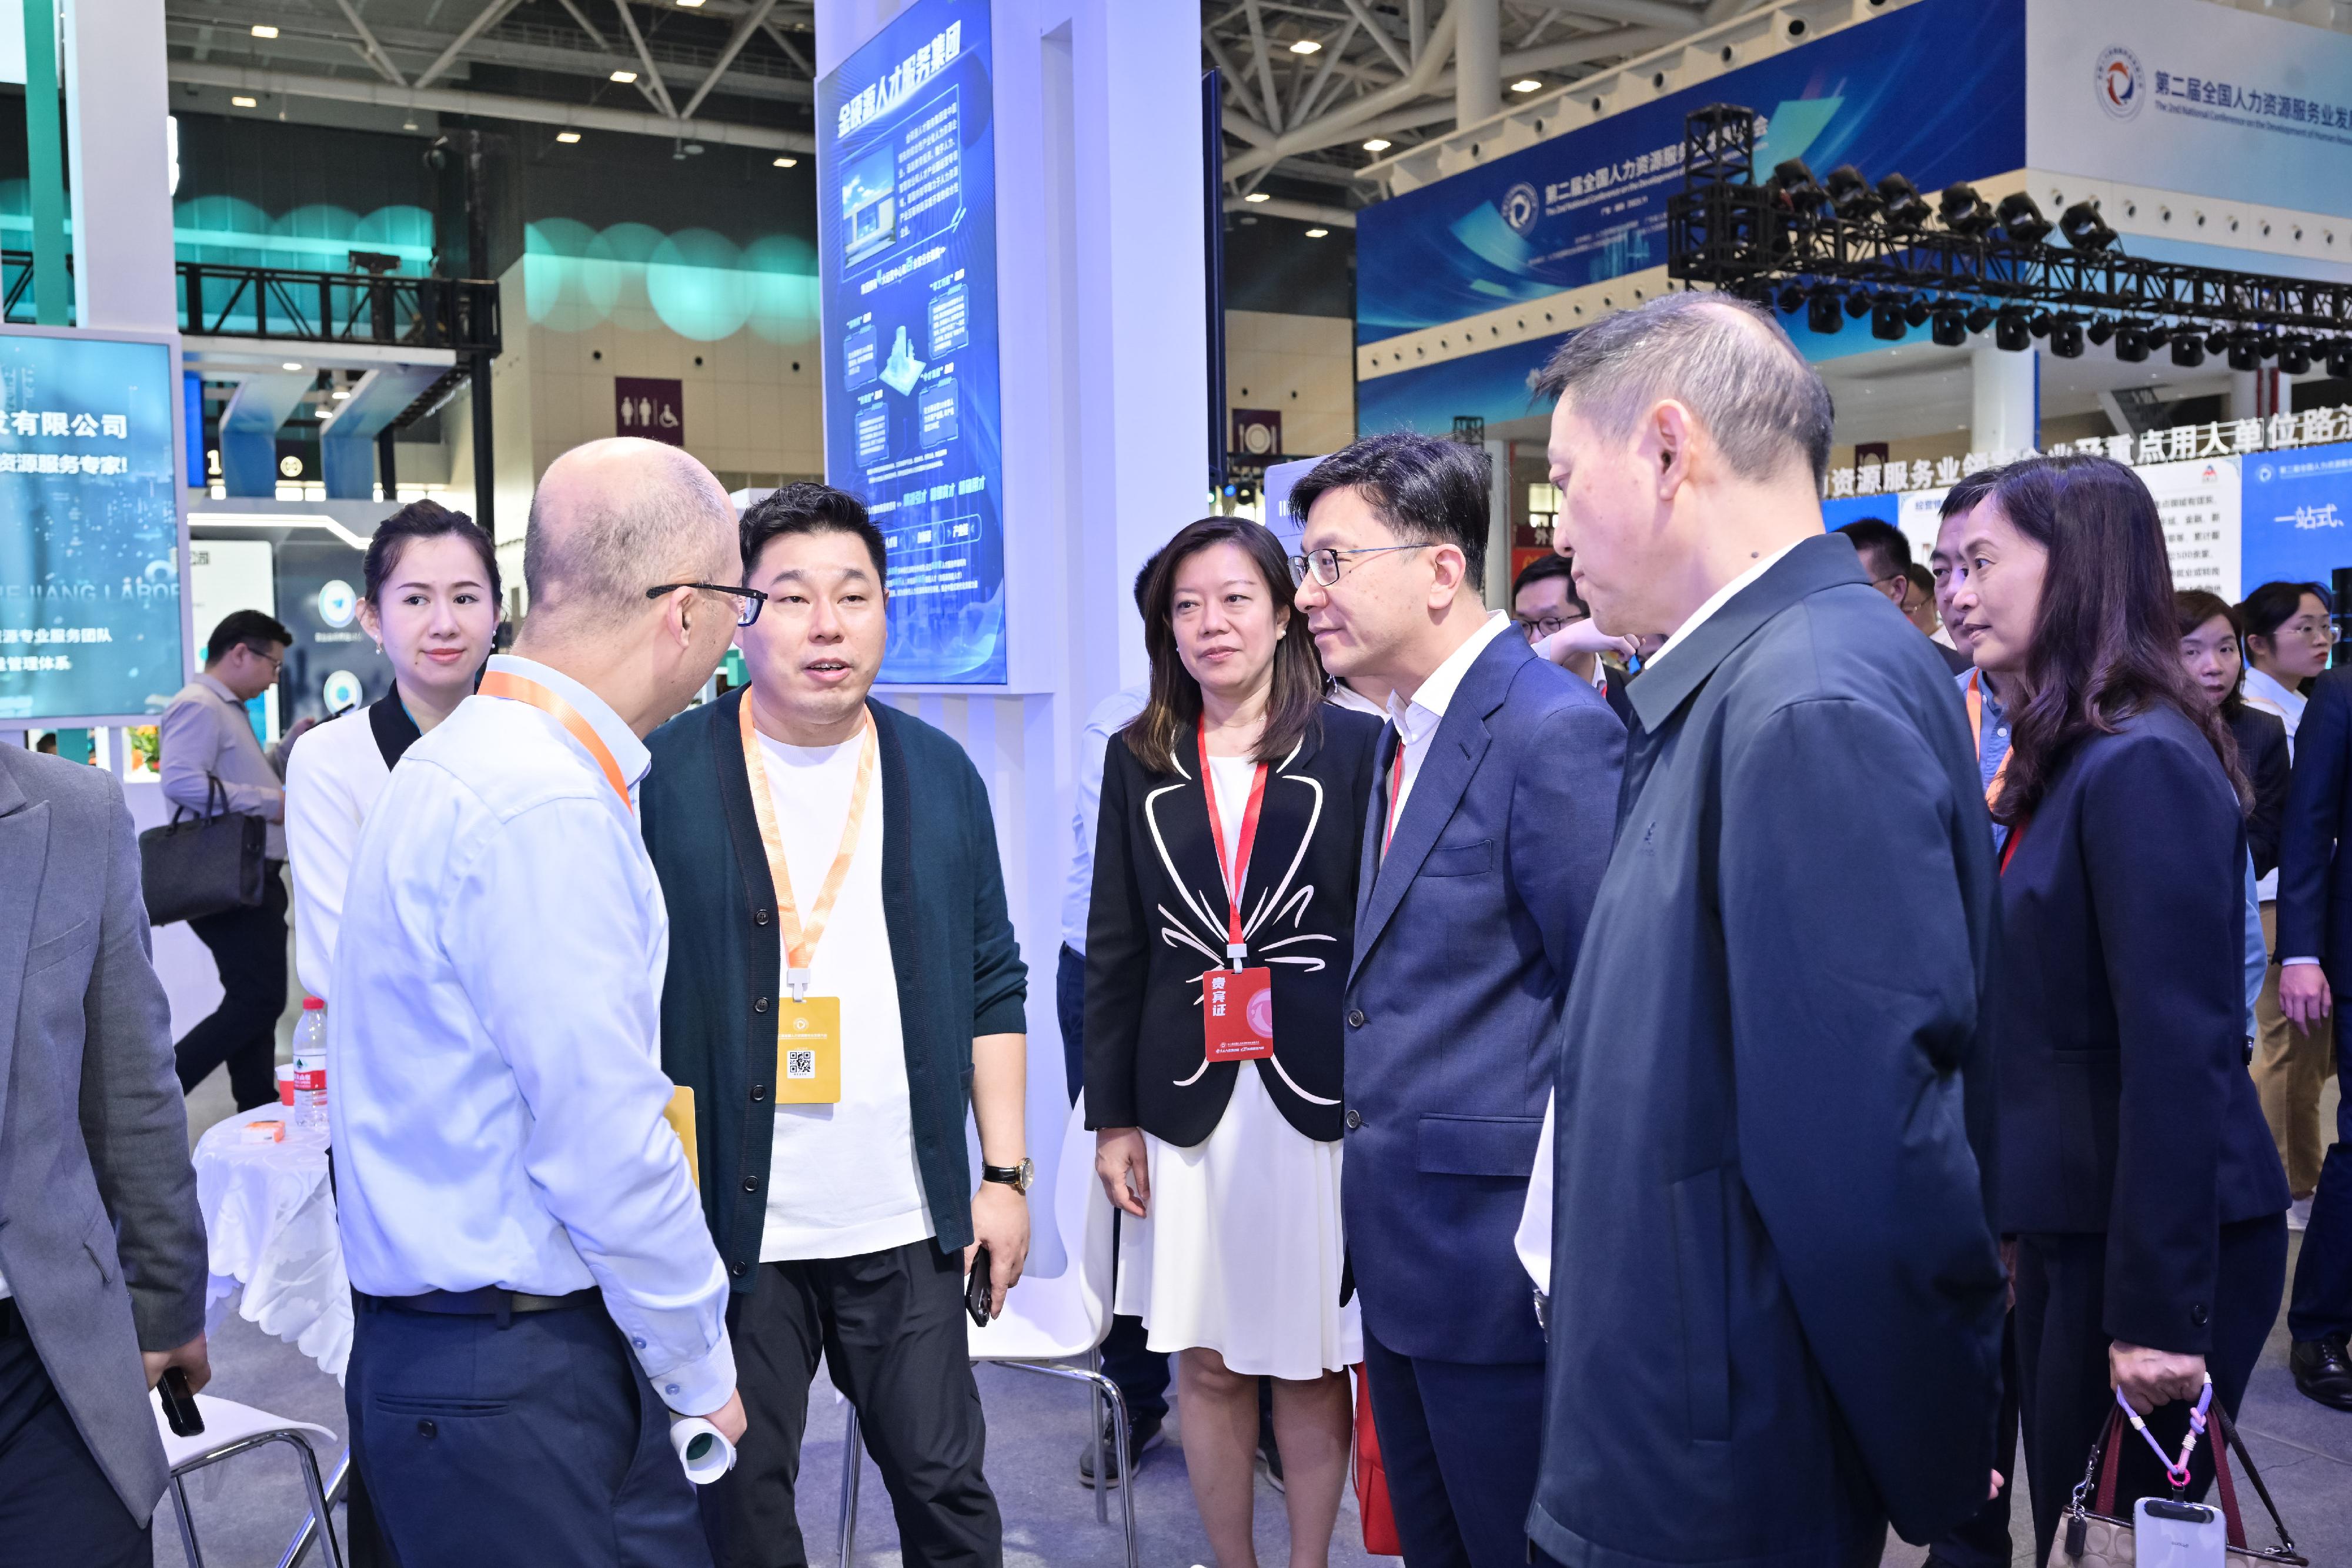 The Secretary for Labour and Welfare, Mr Chris Sun, today (November 22) led a Hong Kong Special Administrative Region delegation to attend the 2nd National Conference on the Development of Human Resources Services in Shenzhen. Photo shows Mr Sun (front row, fourth left) and the Commissioner for Labour, Ms May Chan (front row, third left), touring the exhibition this morning and chatting with exhibitors on the talent demand of various industries.